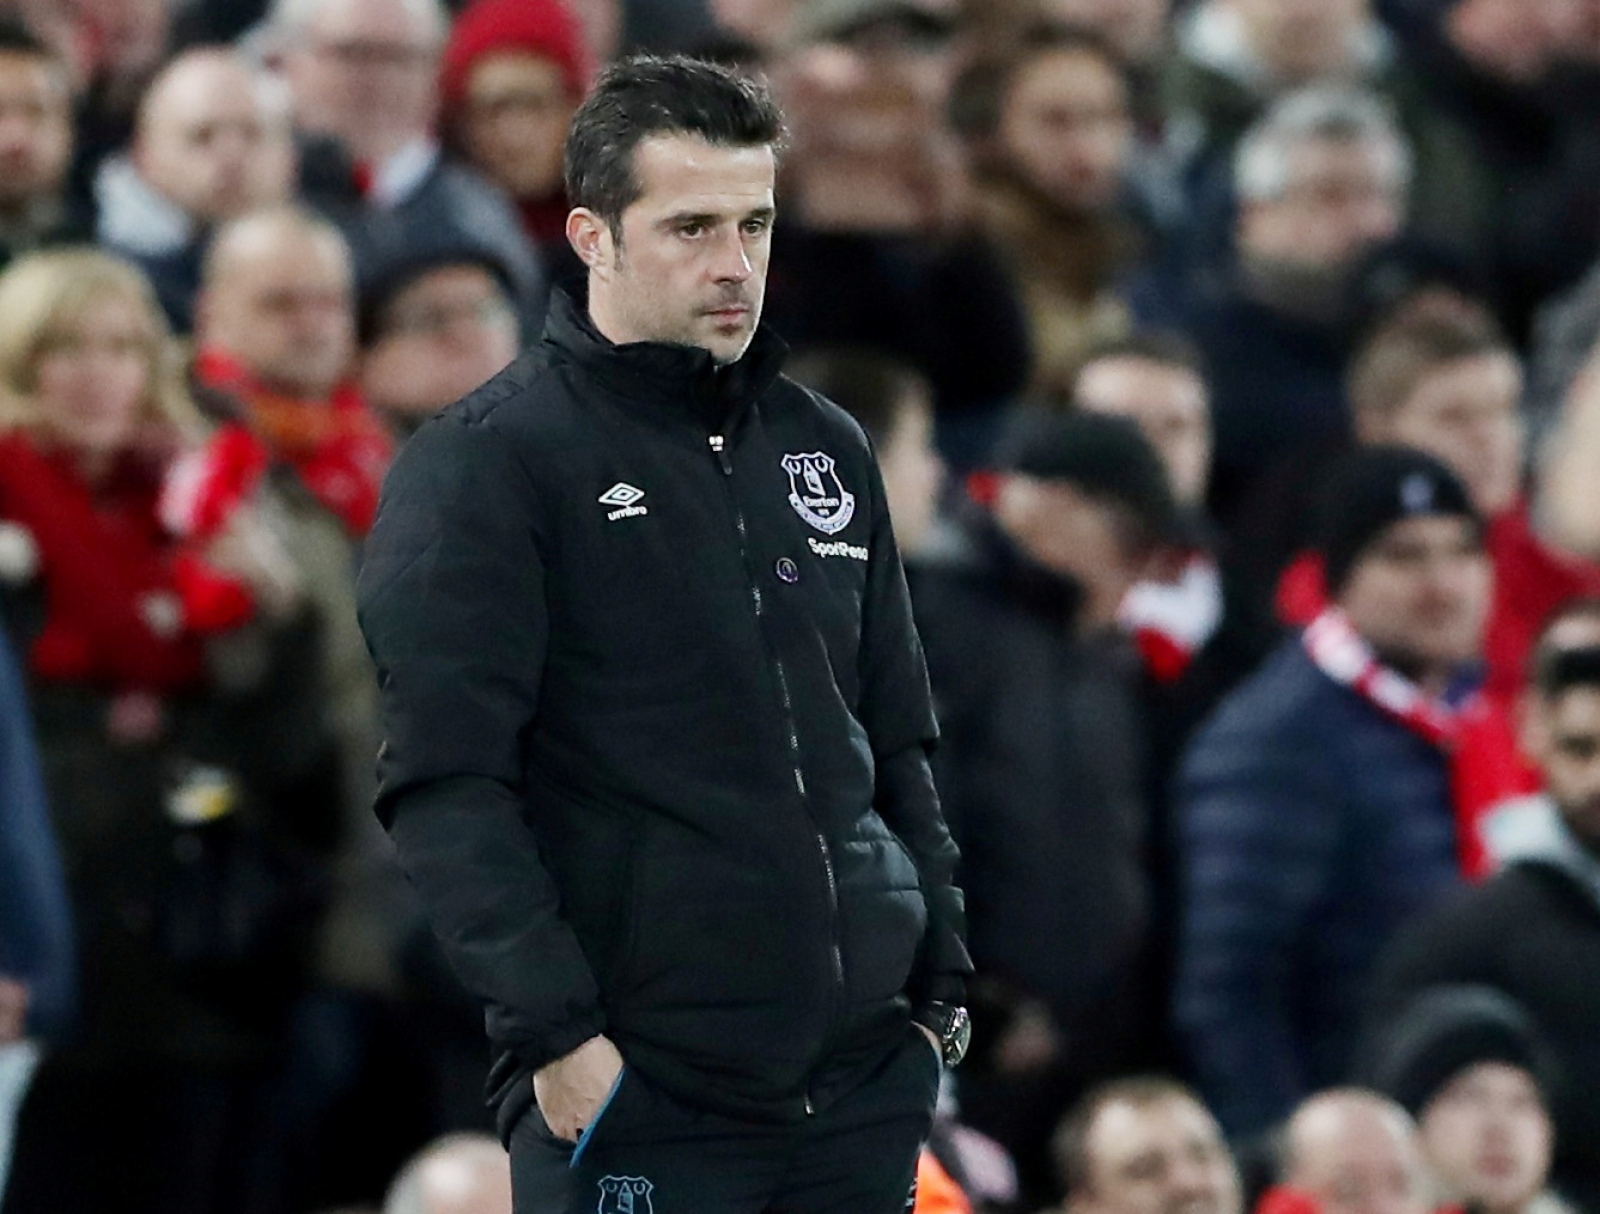 FILE PHOTO: Premier League - Liverpool v Everton FILE PHOTO: Soccer Football - Premier League - Liverpool v Everton - Anfield, Liverpool, Britain - December 4, 2019  Everton manager Marco Silva looks dejected   REUTERS/Scott Heppell  EDITORIAL USE ONLY. No use with unauthorized audio, video, data, fixture lists, club/league logos or "live" services. Online in-match use limited to 75 images, no video emulation. No use in betting, games or single club/league/player publications.  Please contact your account representative for further details./File Photo Scott Heppell